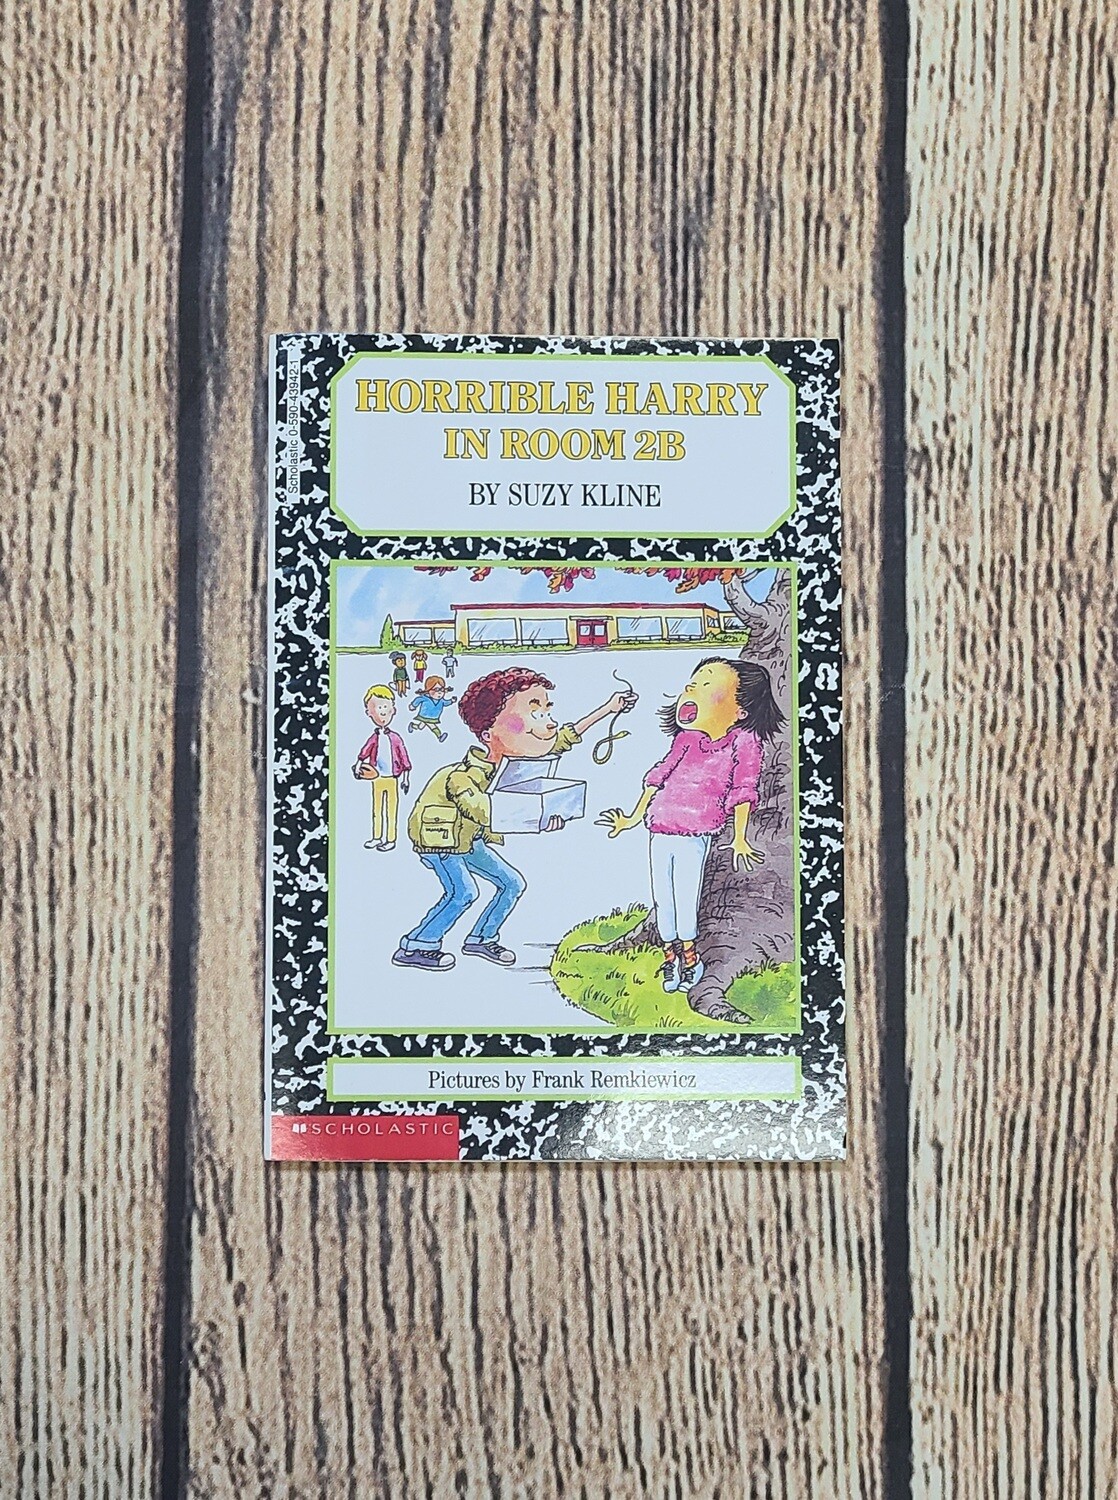 Horrible Harry in Room 2B by Suzy Kline and Pictures by Frank Remkiewicz - Paperback - Great Condition